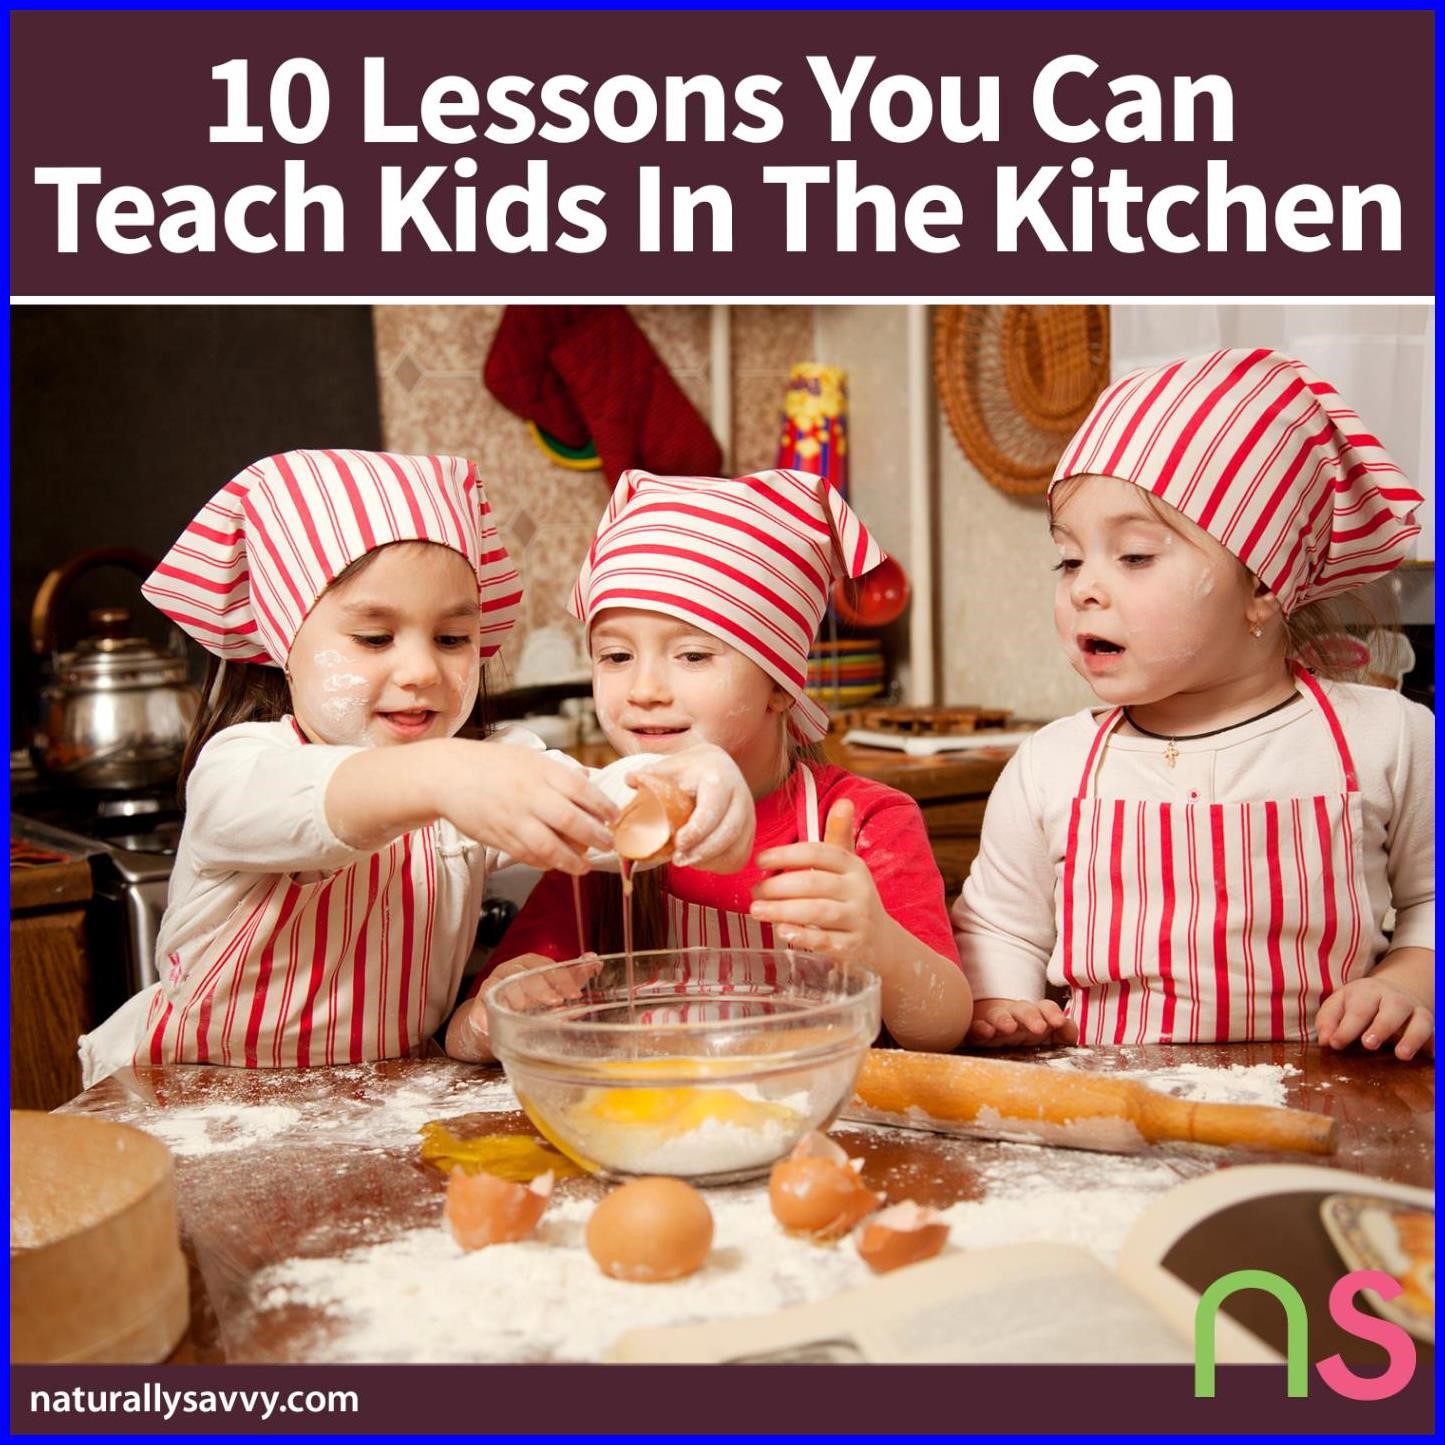 17 Healthy Kids Kitchen  Educational Lessons You Can Teach Kids in the Kitchen Healthy,Kids,Kitchen